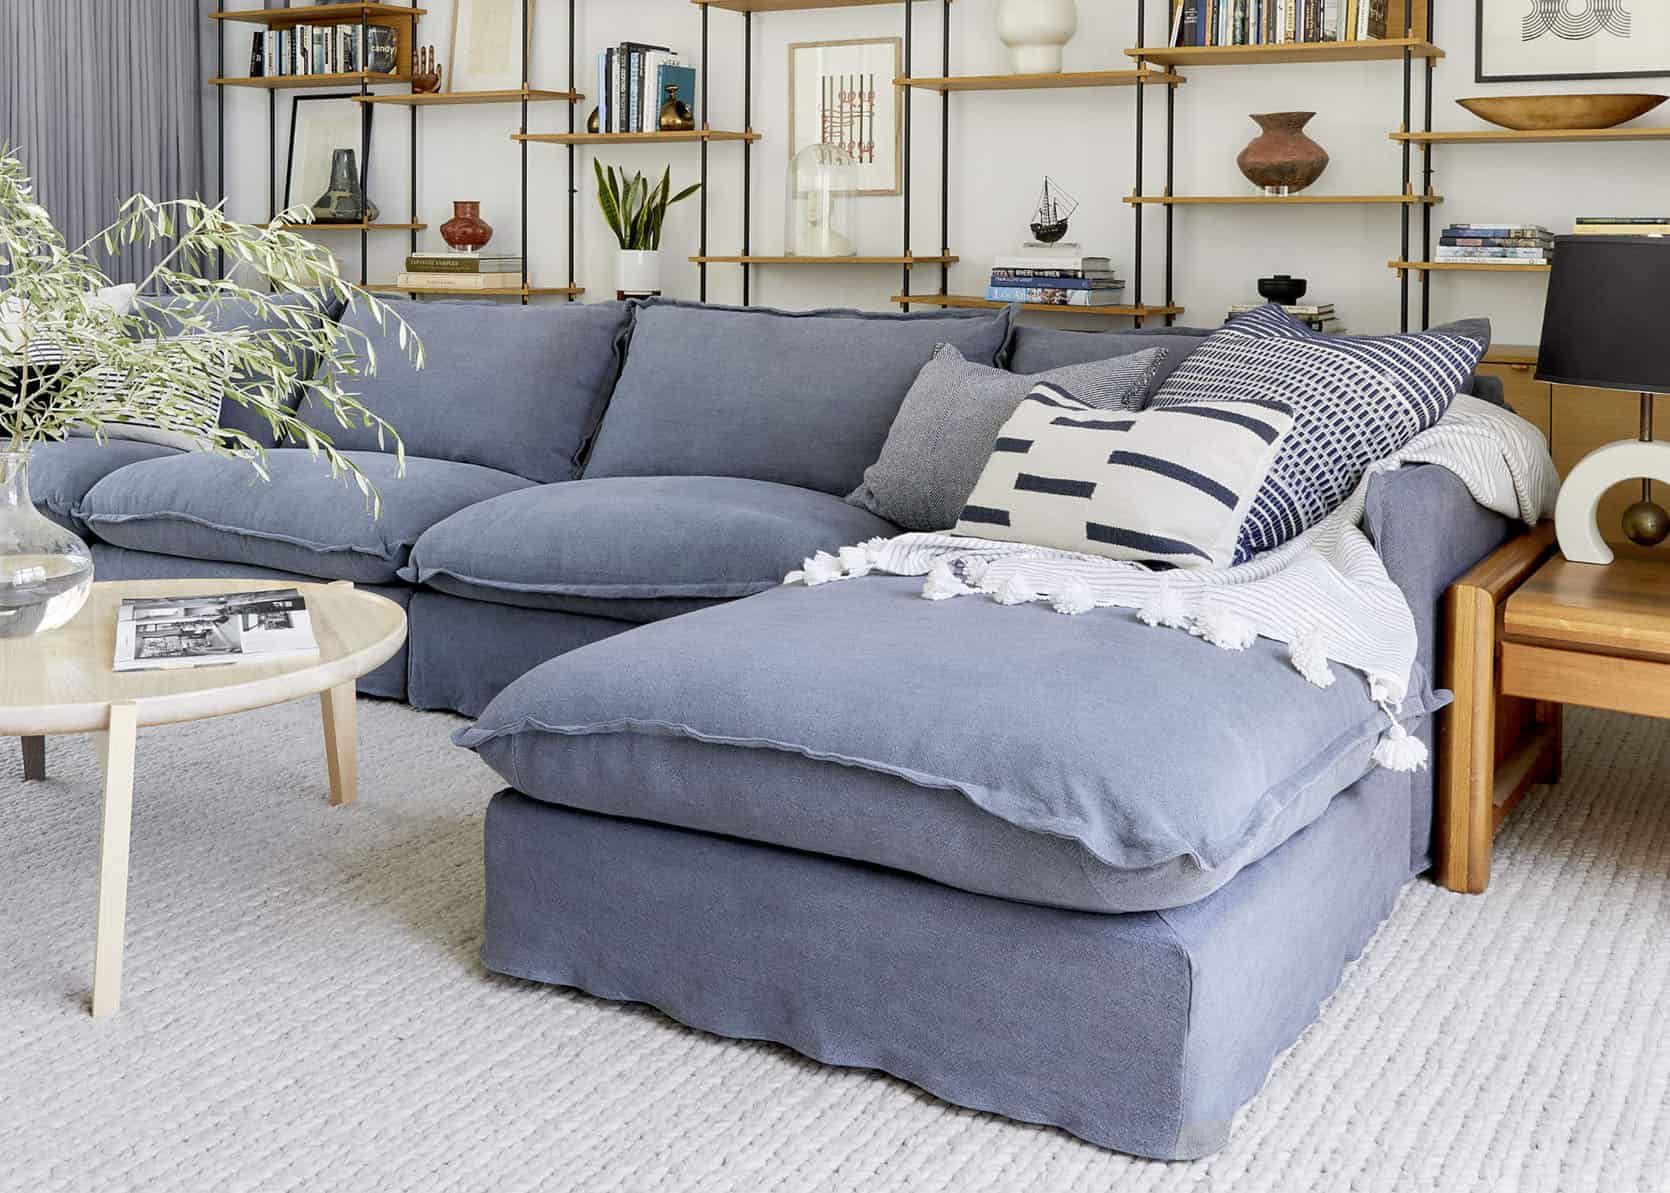 What Is The Most Comfortable Sofa